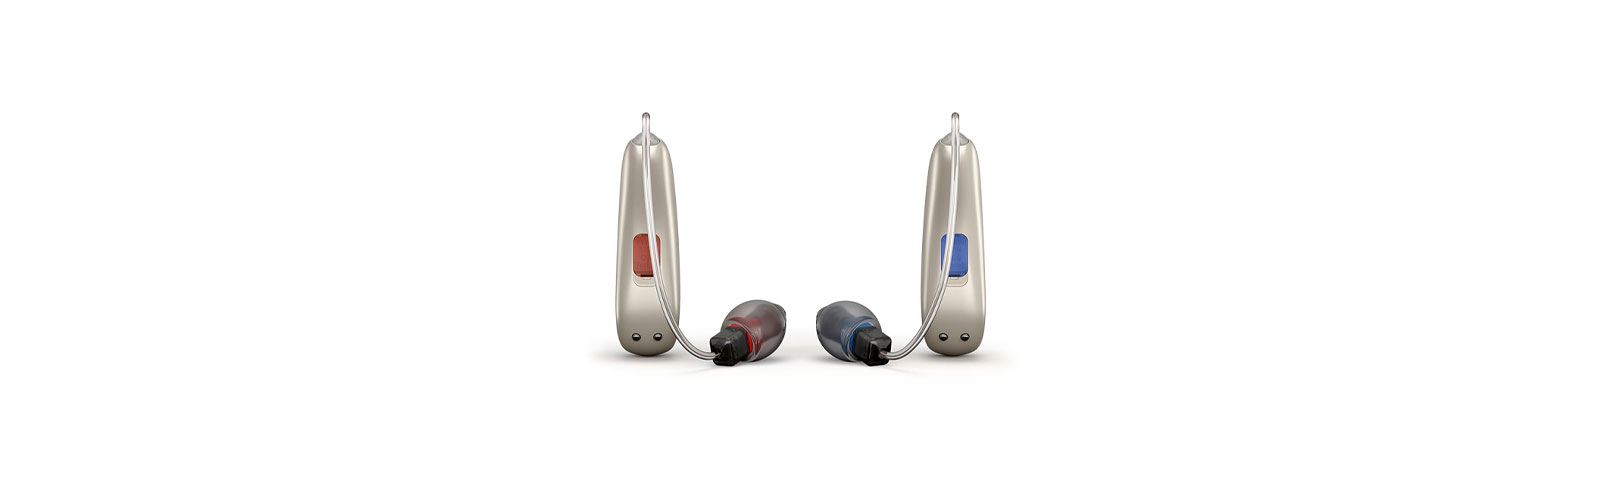 two hearing aids side by side